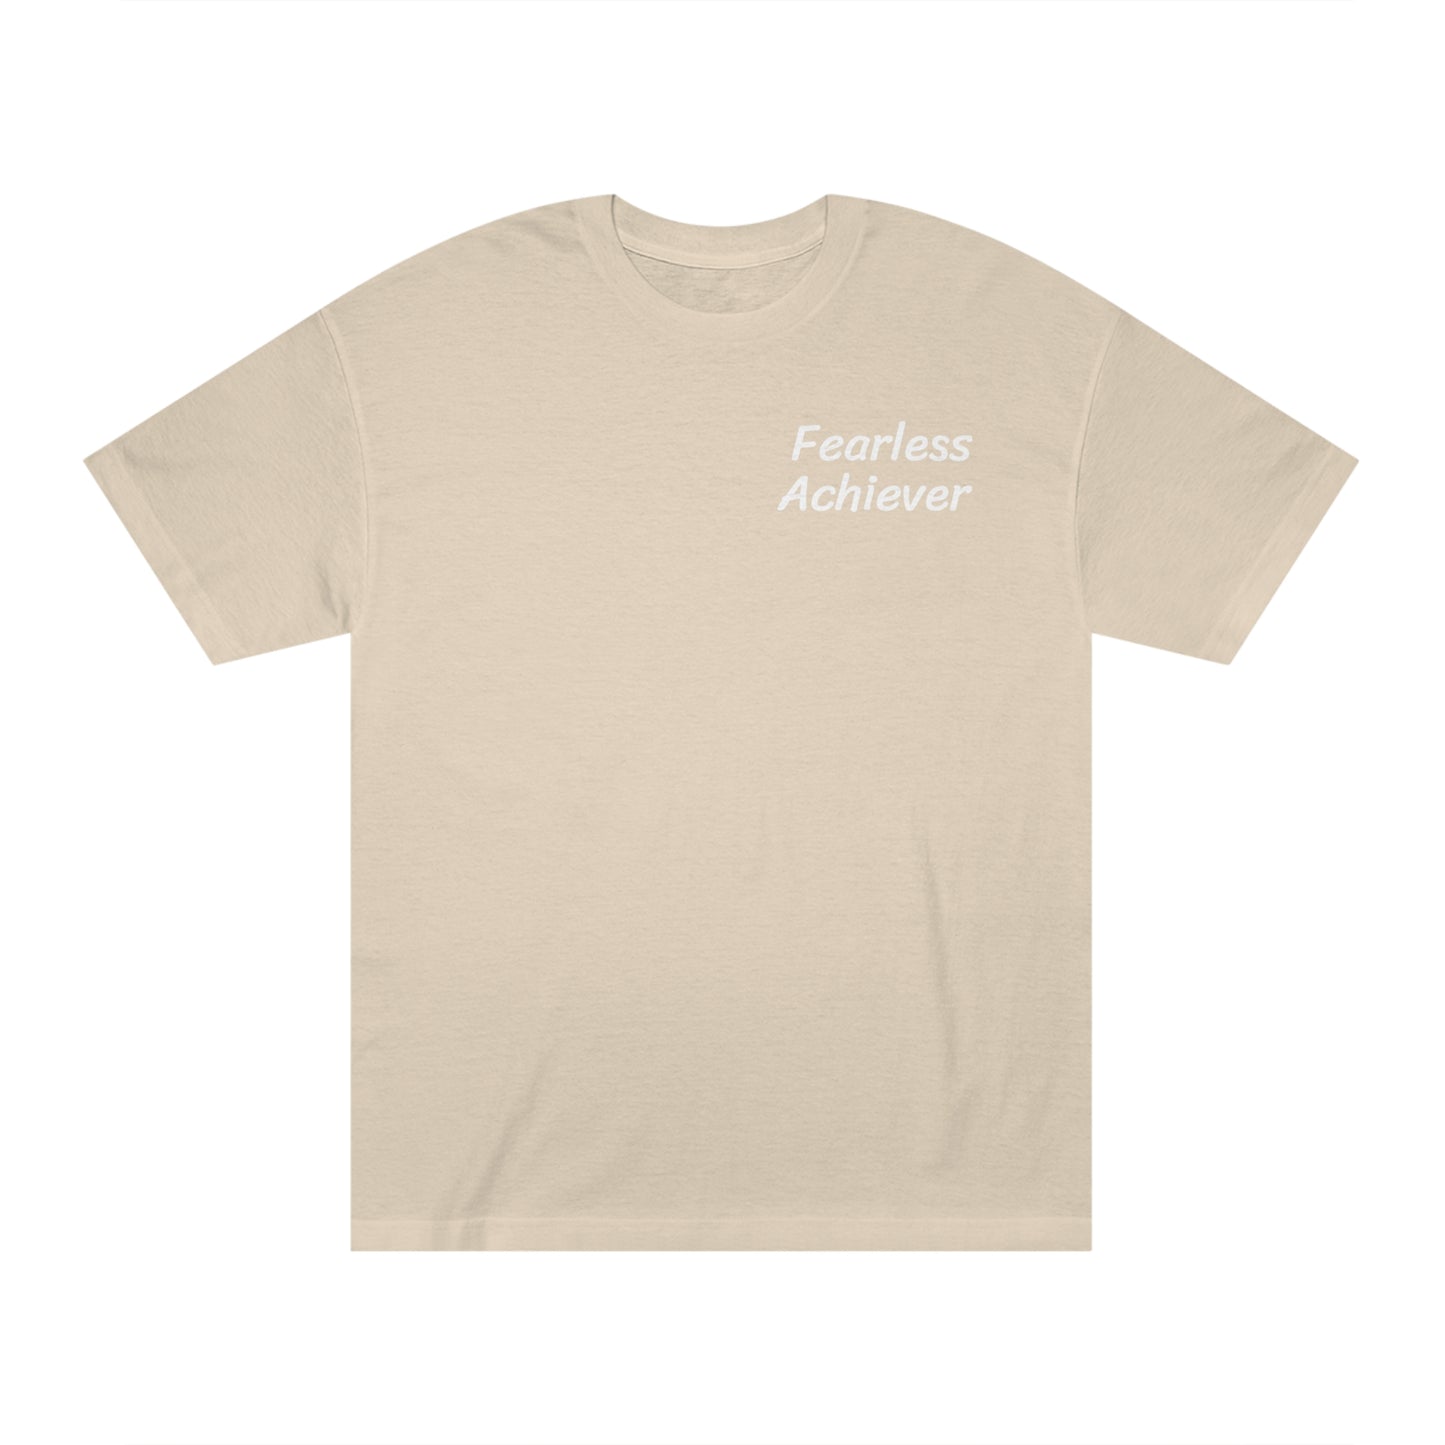 Classic Tee Fearless achiever